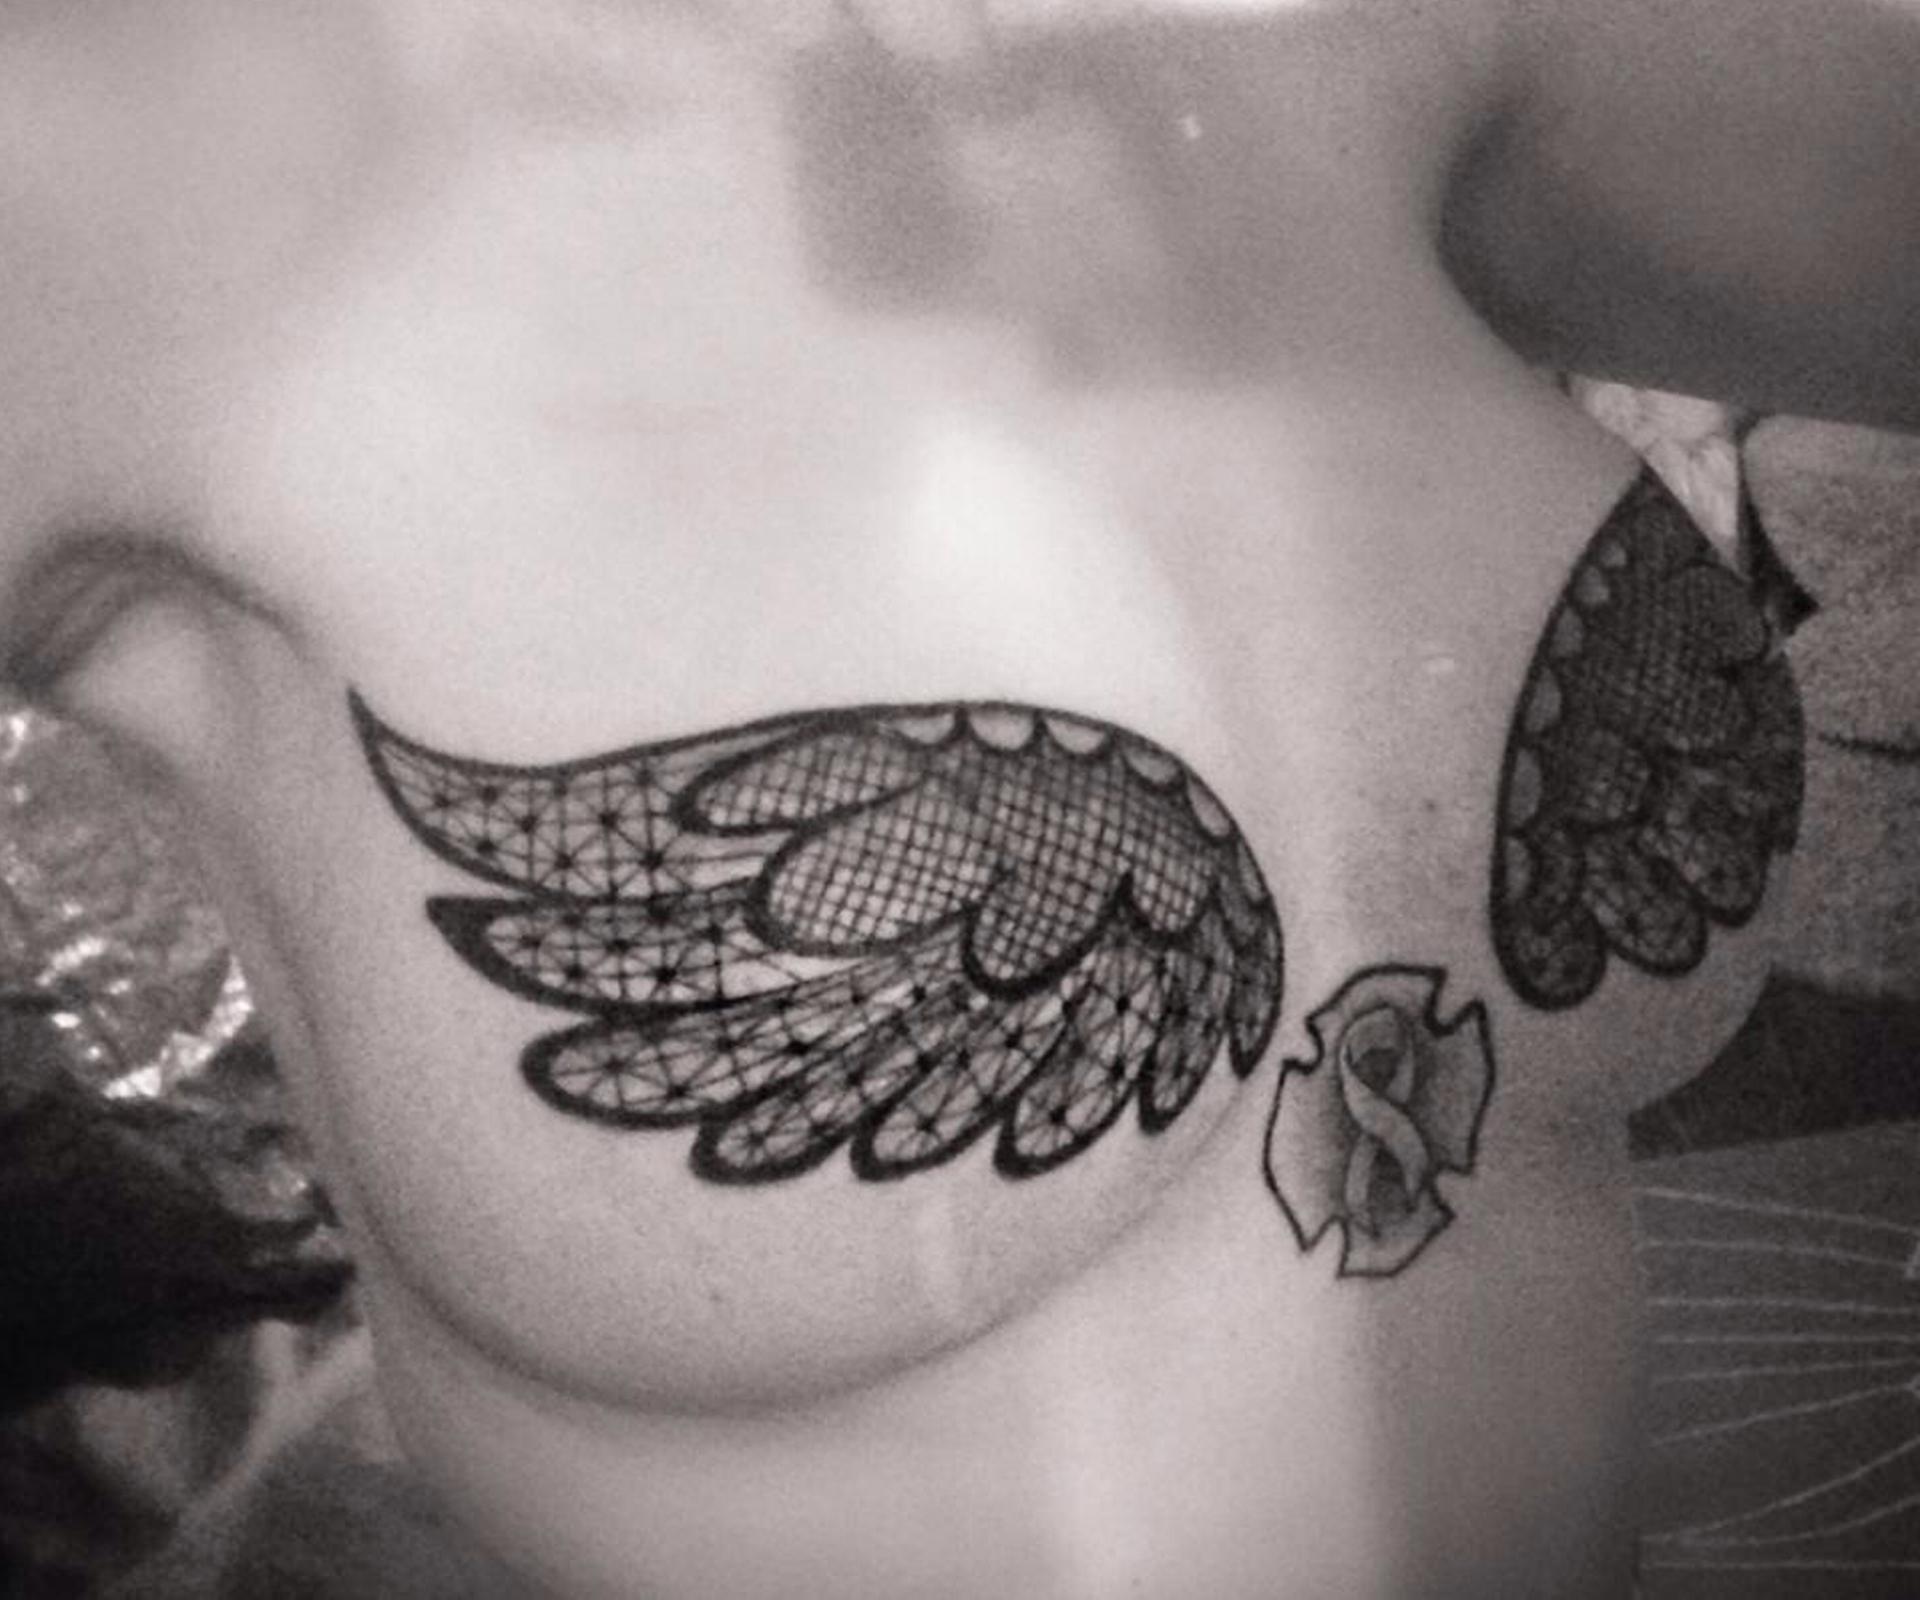 Meet the women turning their mastectomy scars into pieces of art